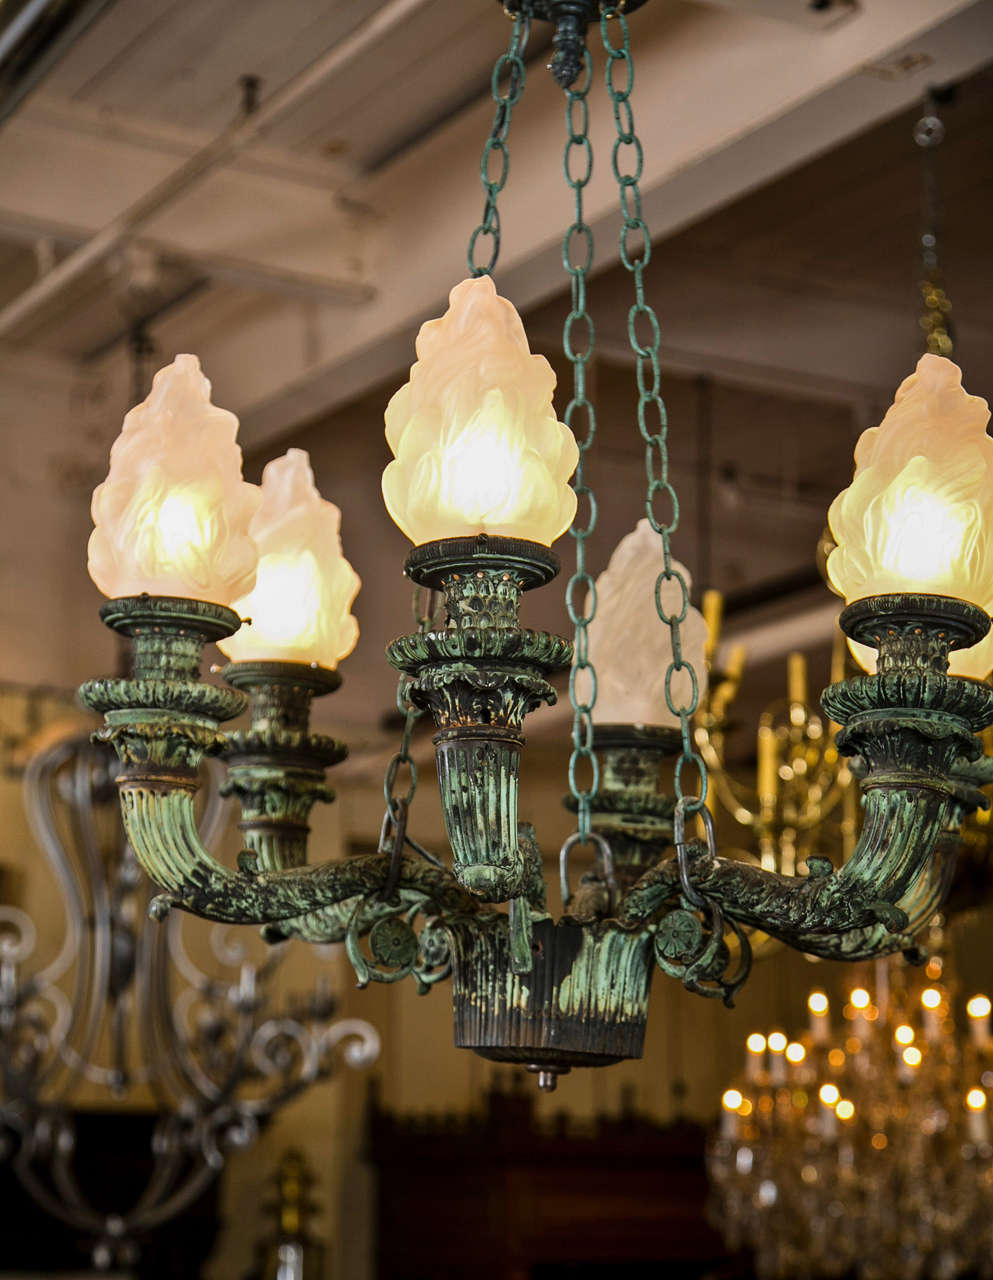 Pair of Antique Bronze Chandeliers Salvaged From Archiitectural Design 2